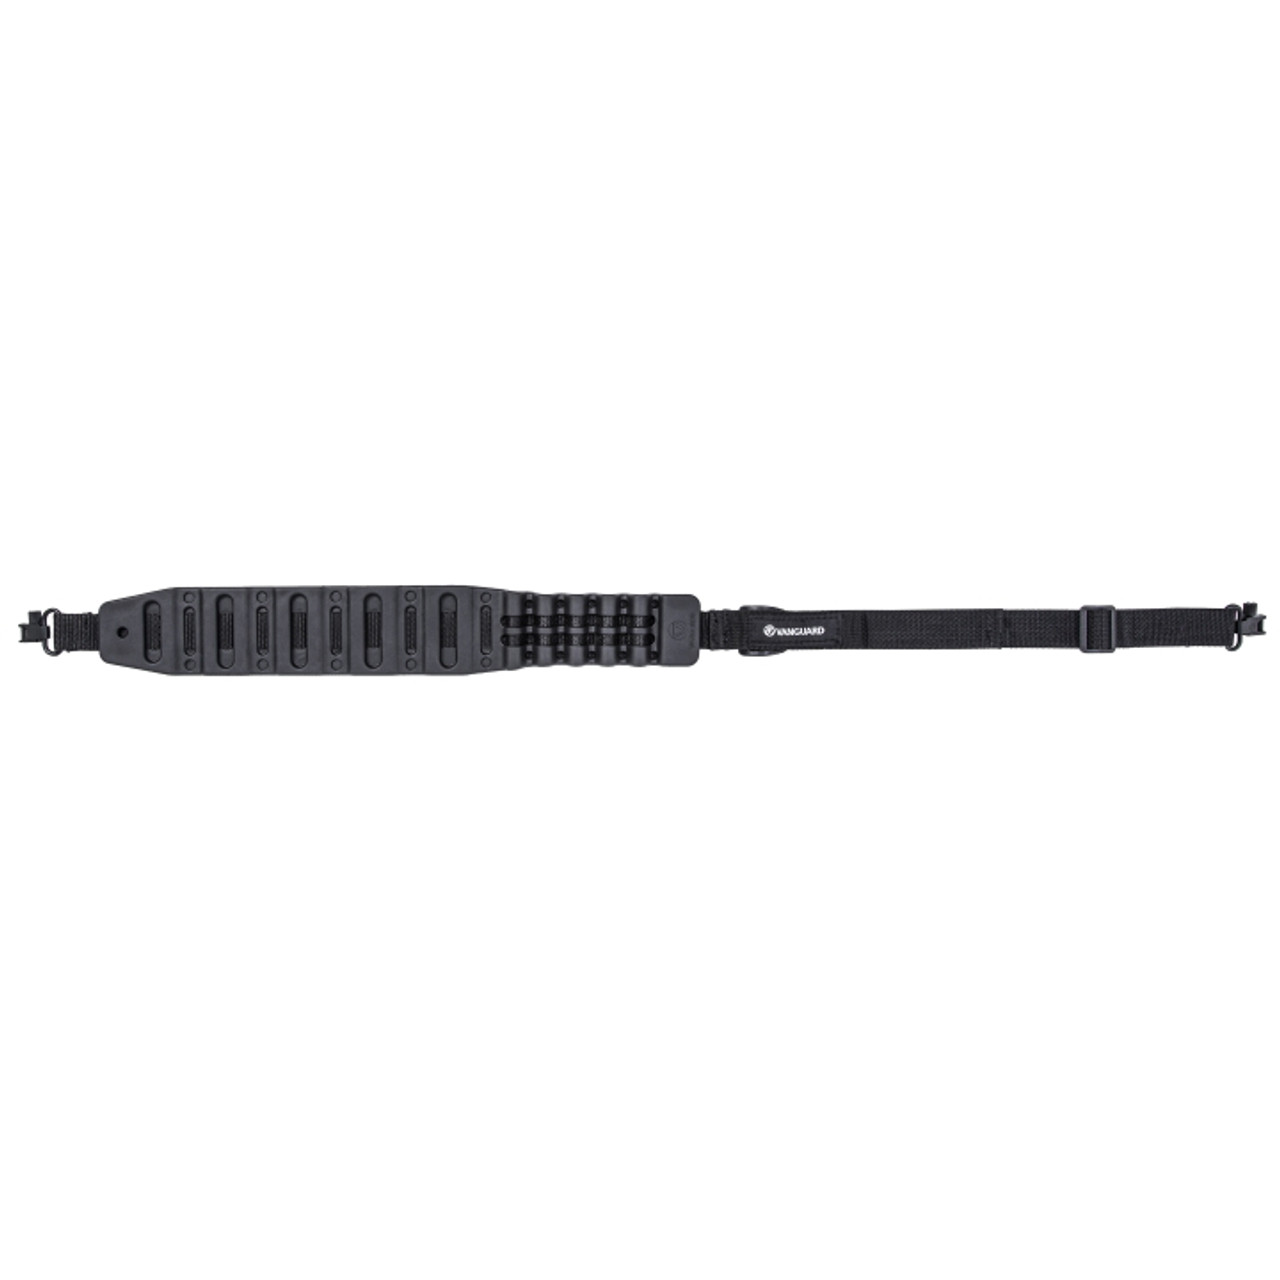 Vanguard Endeavor Black Rubber Rifle Sling With Integrated Rubber Spring  301B 